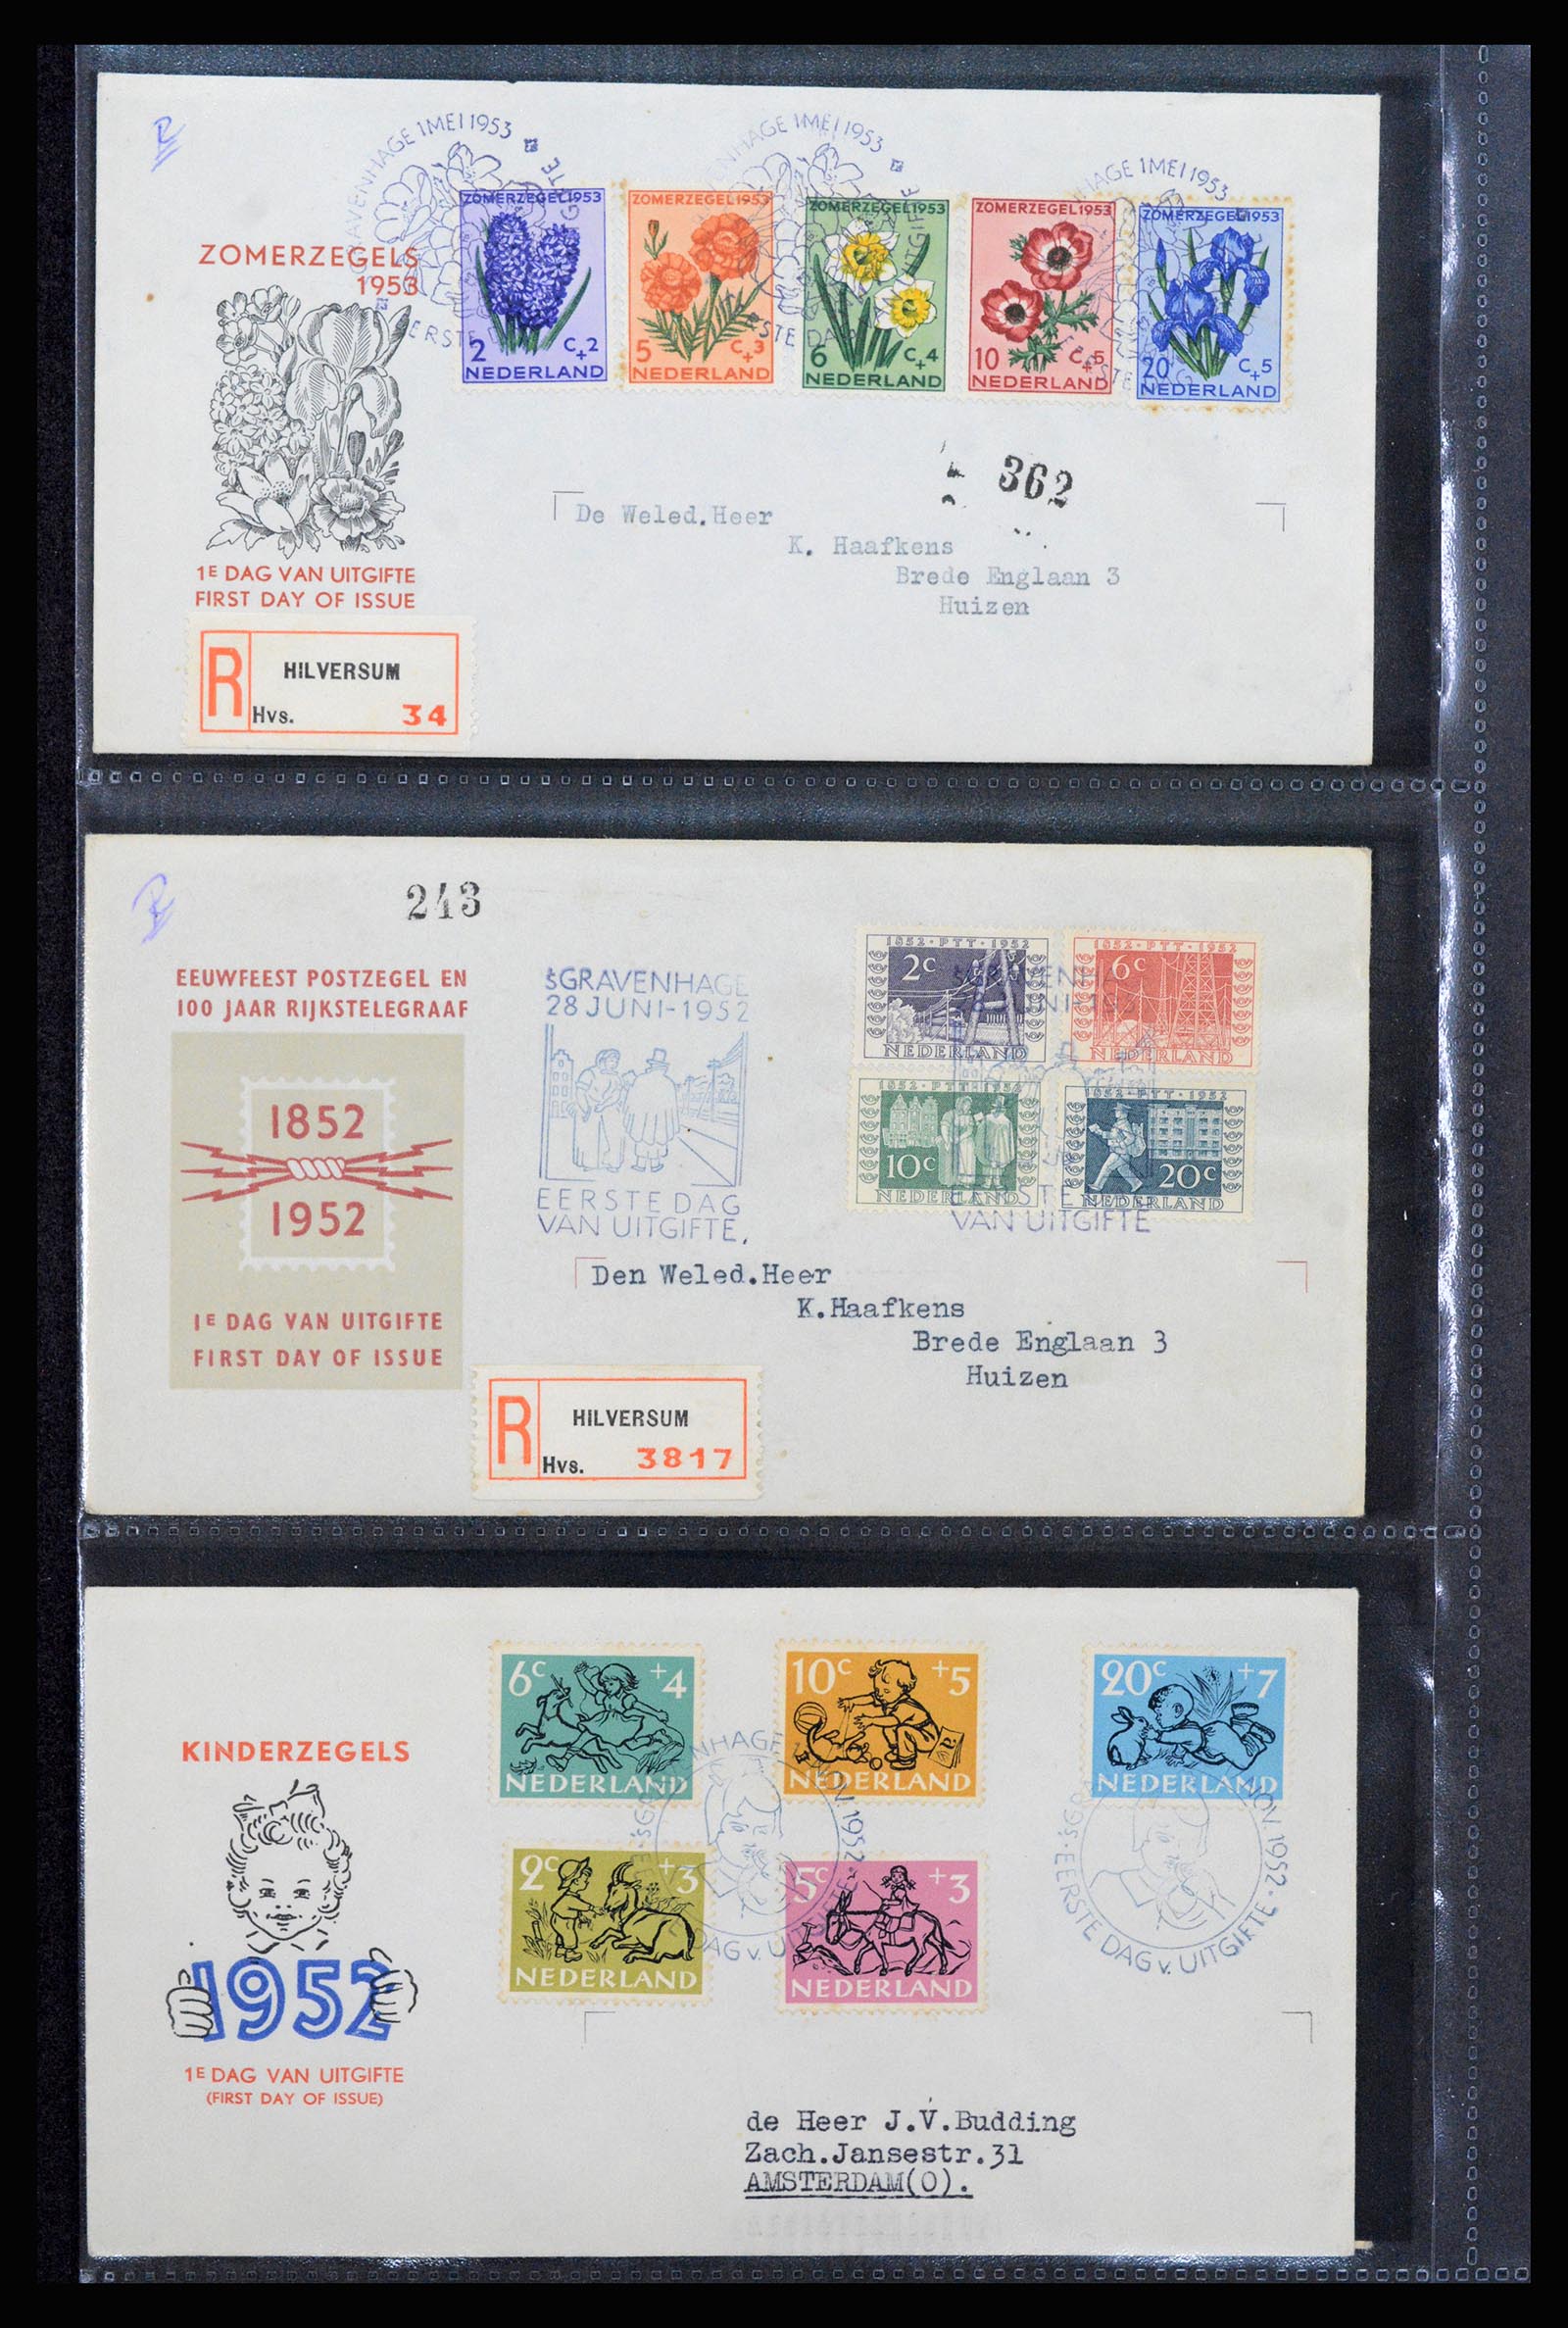 37264 004 - Stamp collection 37264 Netherlands FDC's 1950-1975.